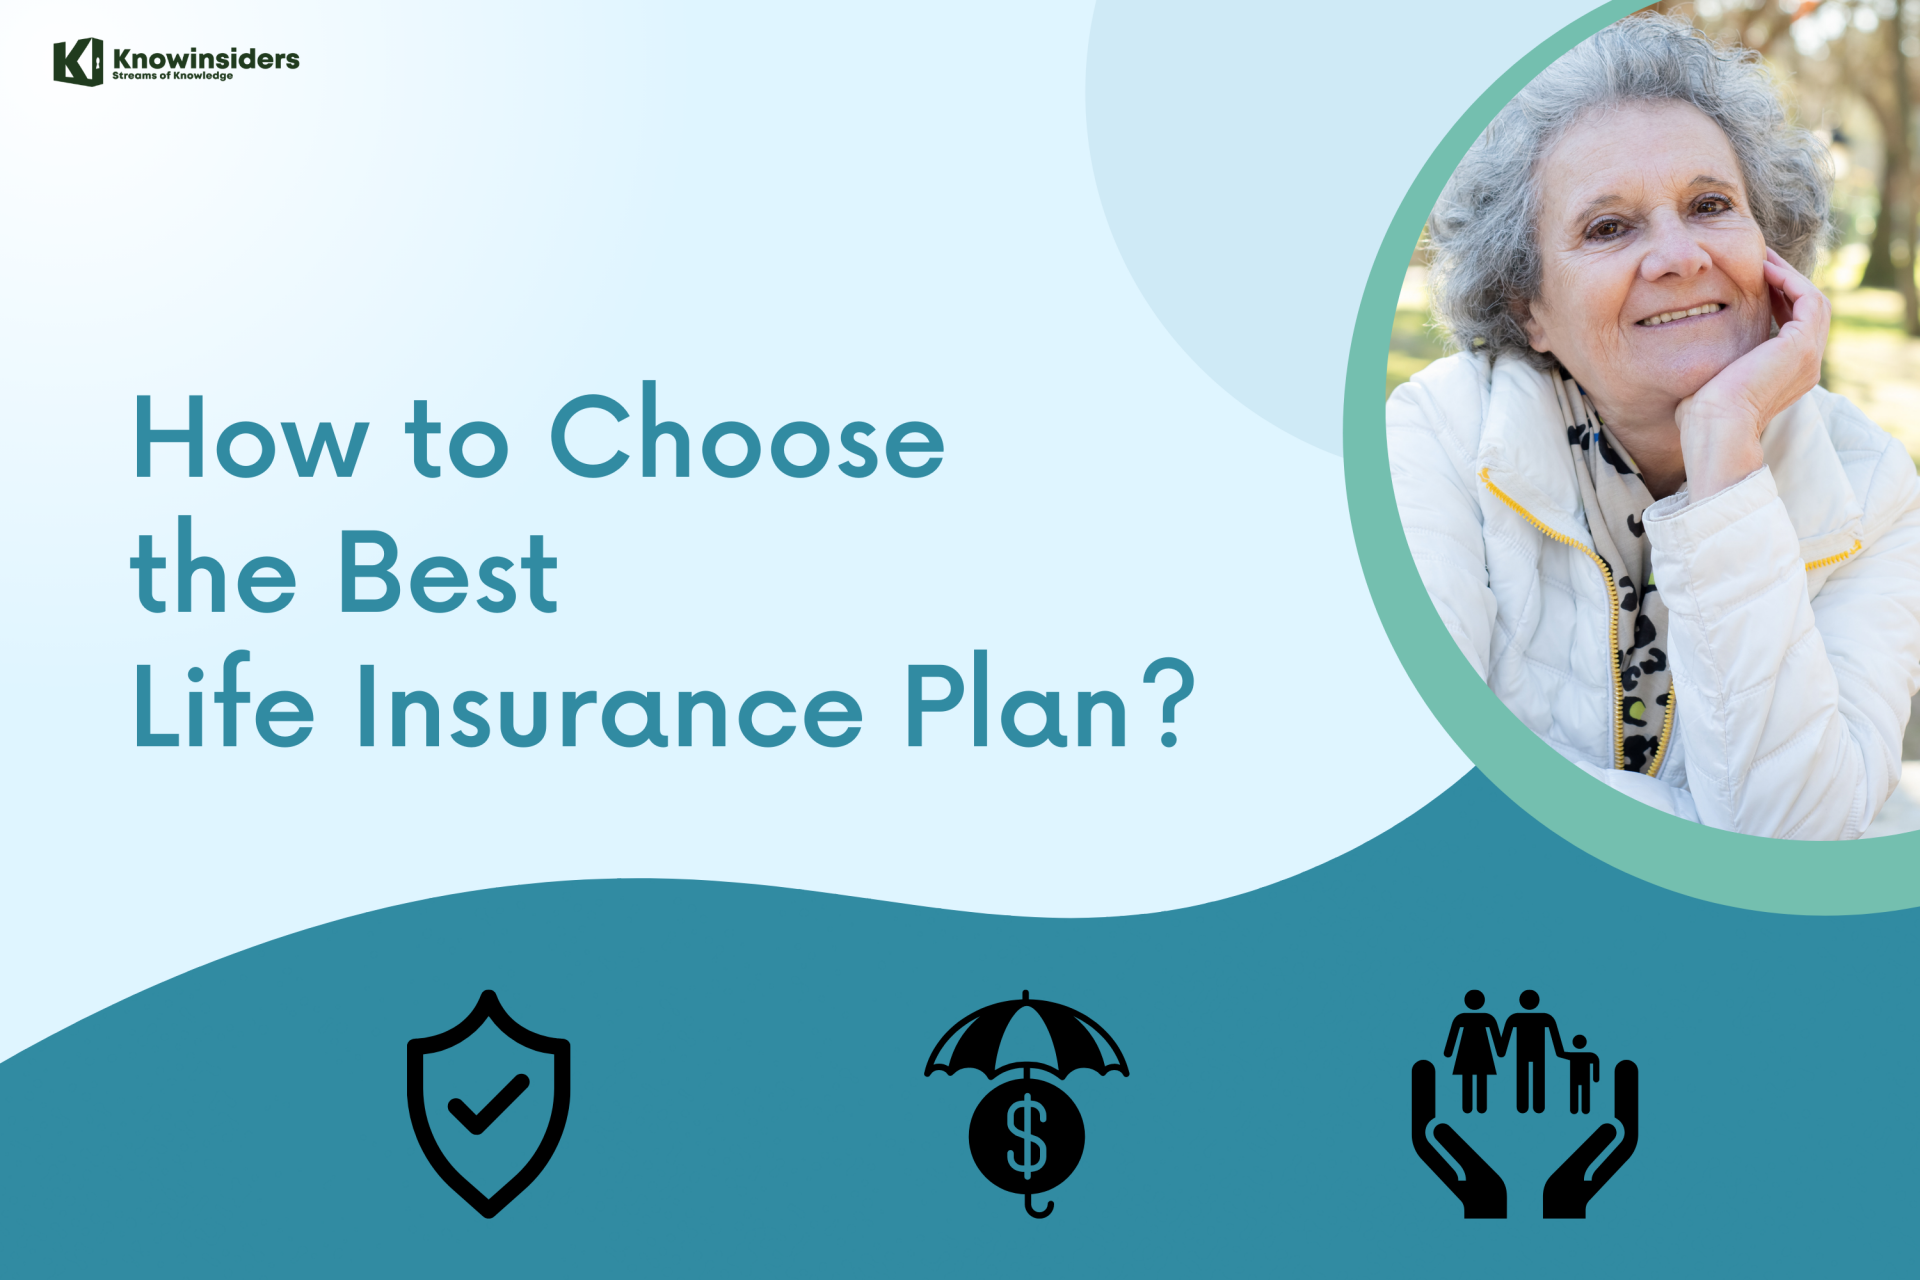 10 Tips to Select the Right Life Insurance Plan and Company